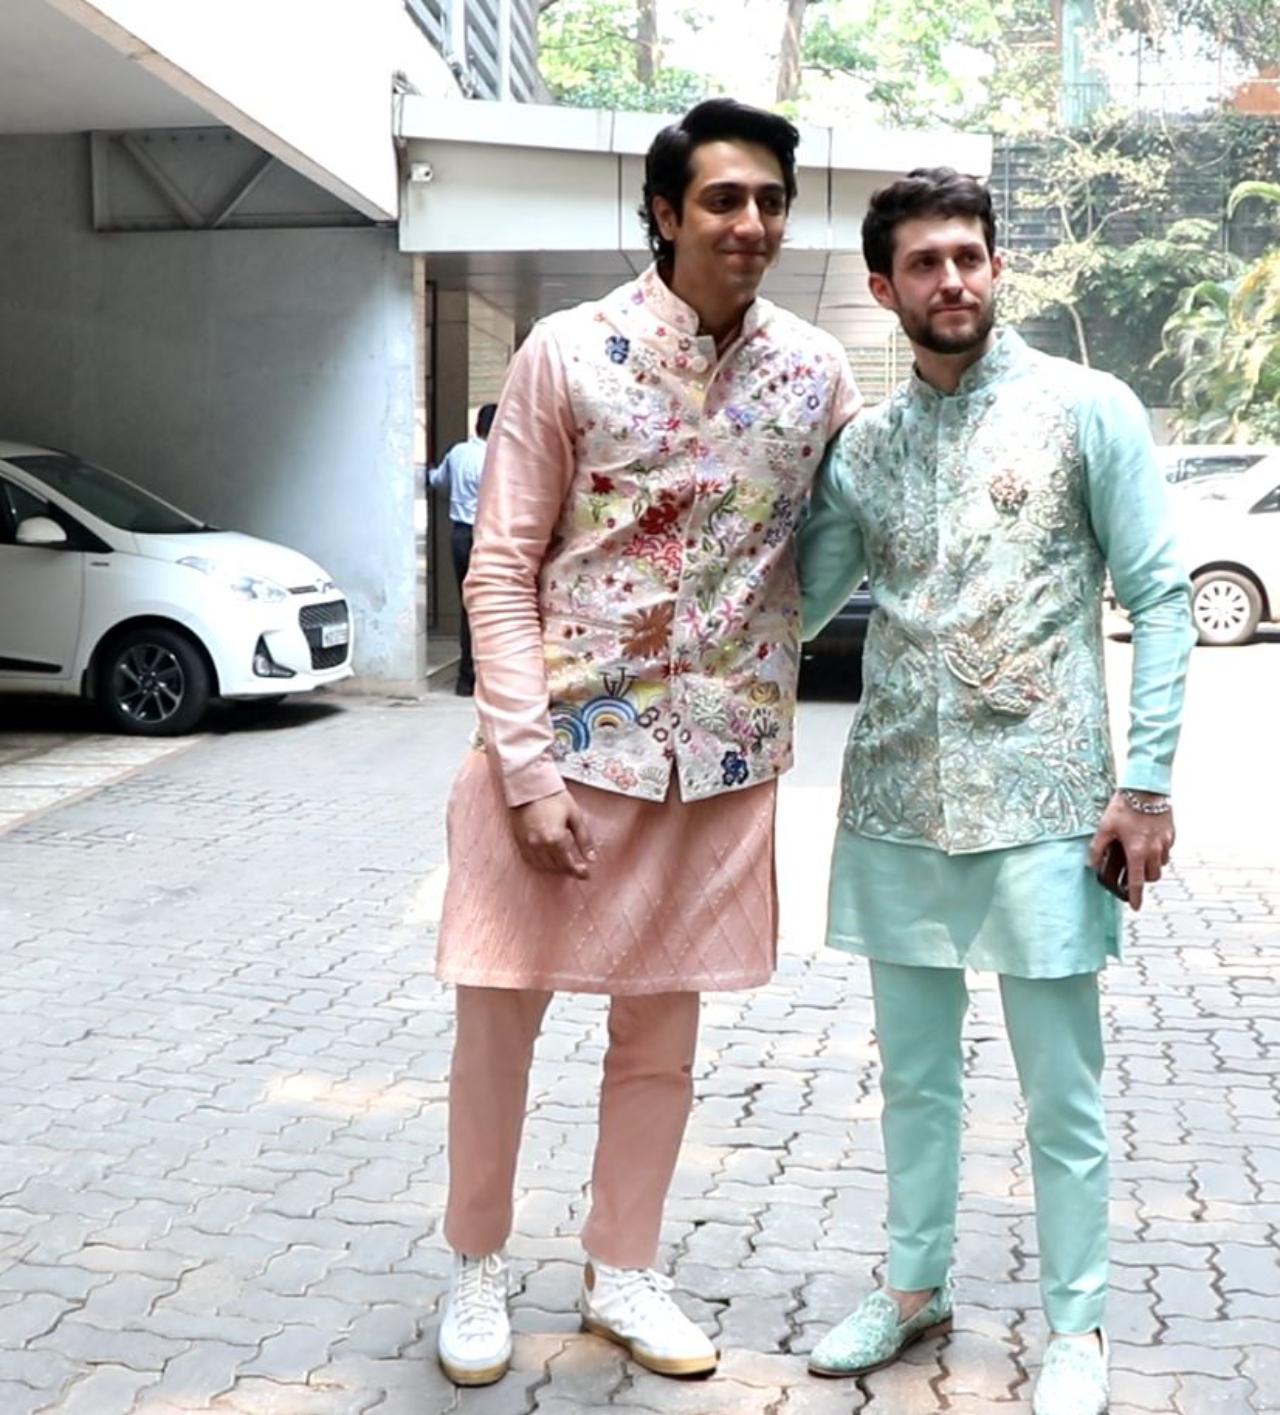 Groom-to-be Ivor McCray twinned with her bride in a matching sherwani. On the other hand, Ananya's cousin Ahaan Panday twinned with her. He was seen in pink tonned ethinc outfit